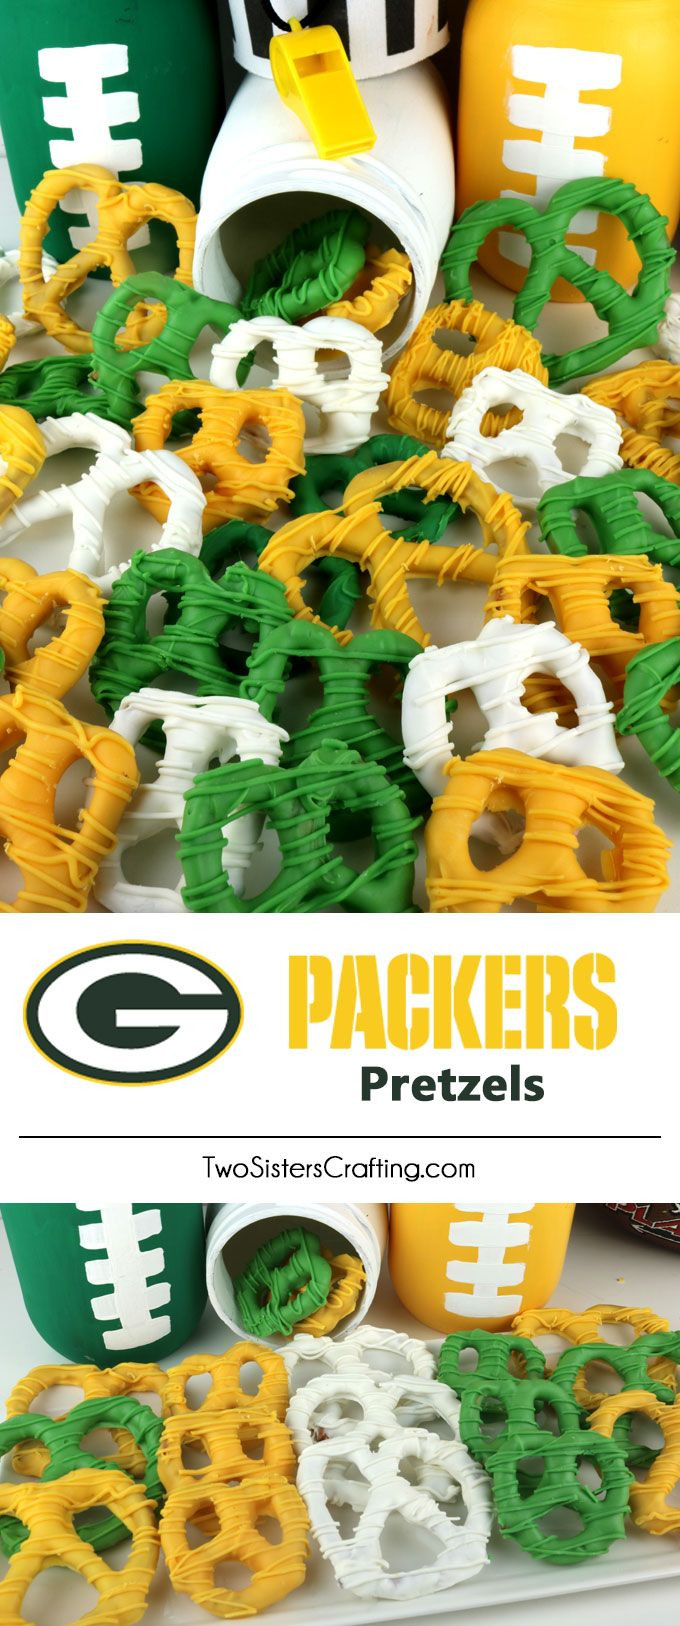 Packer Party Food Ideas
 Green Bay Packers Pretzels Game Day Treats